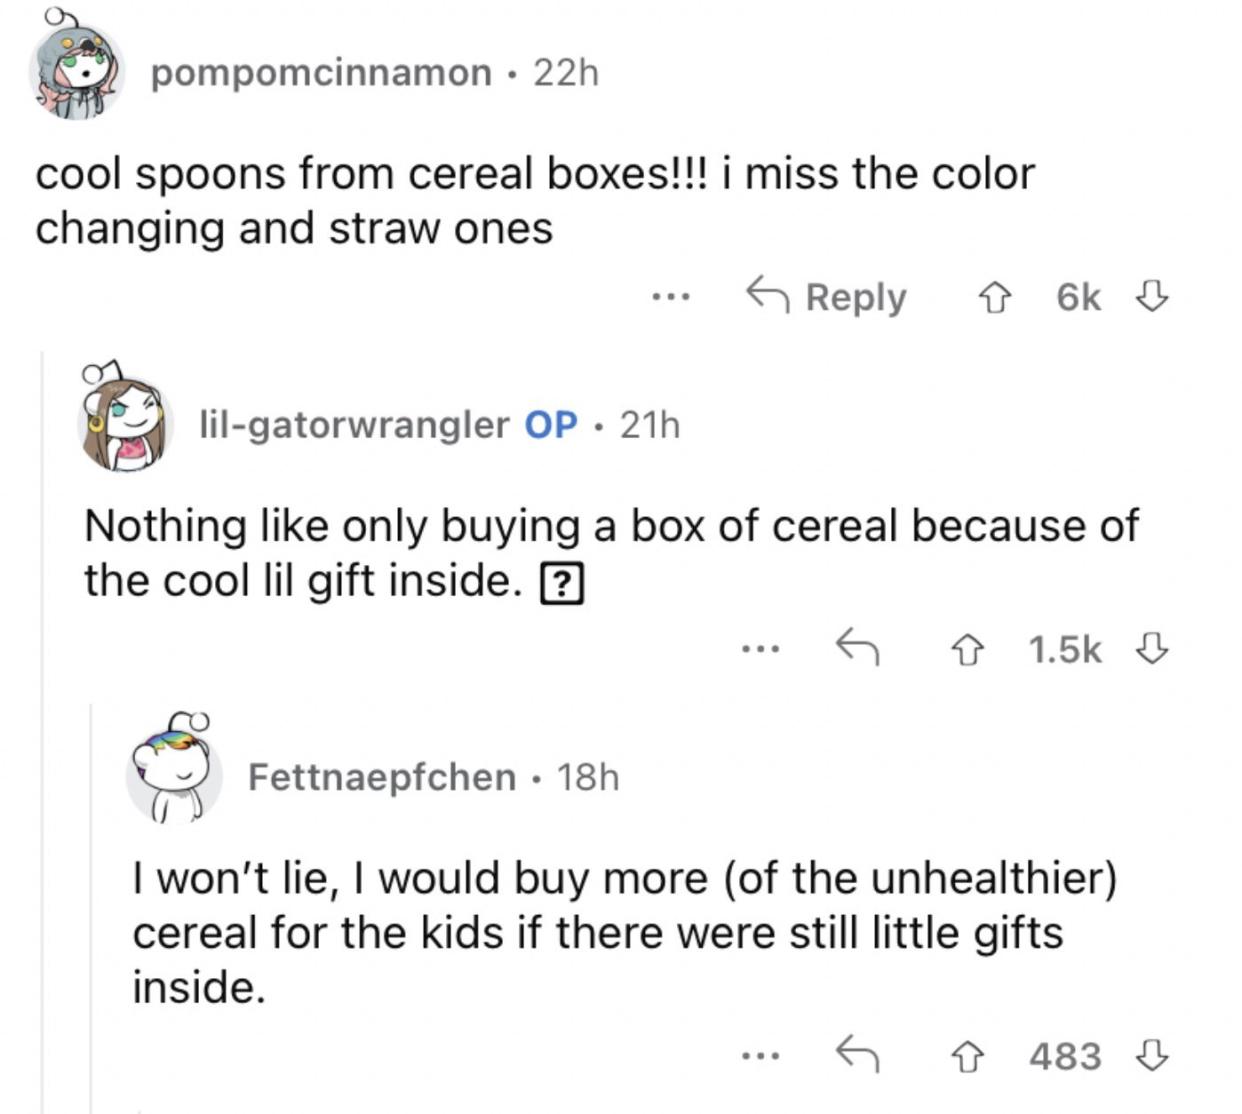 Reddit screenshot about how cool spoons used to be packed into cereal boxes.